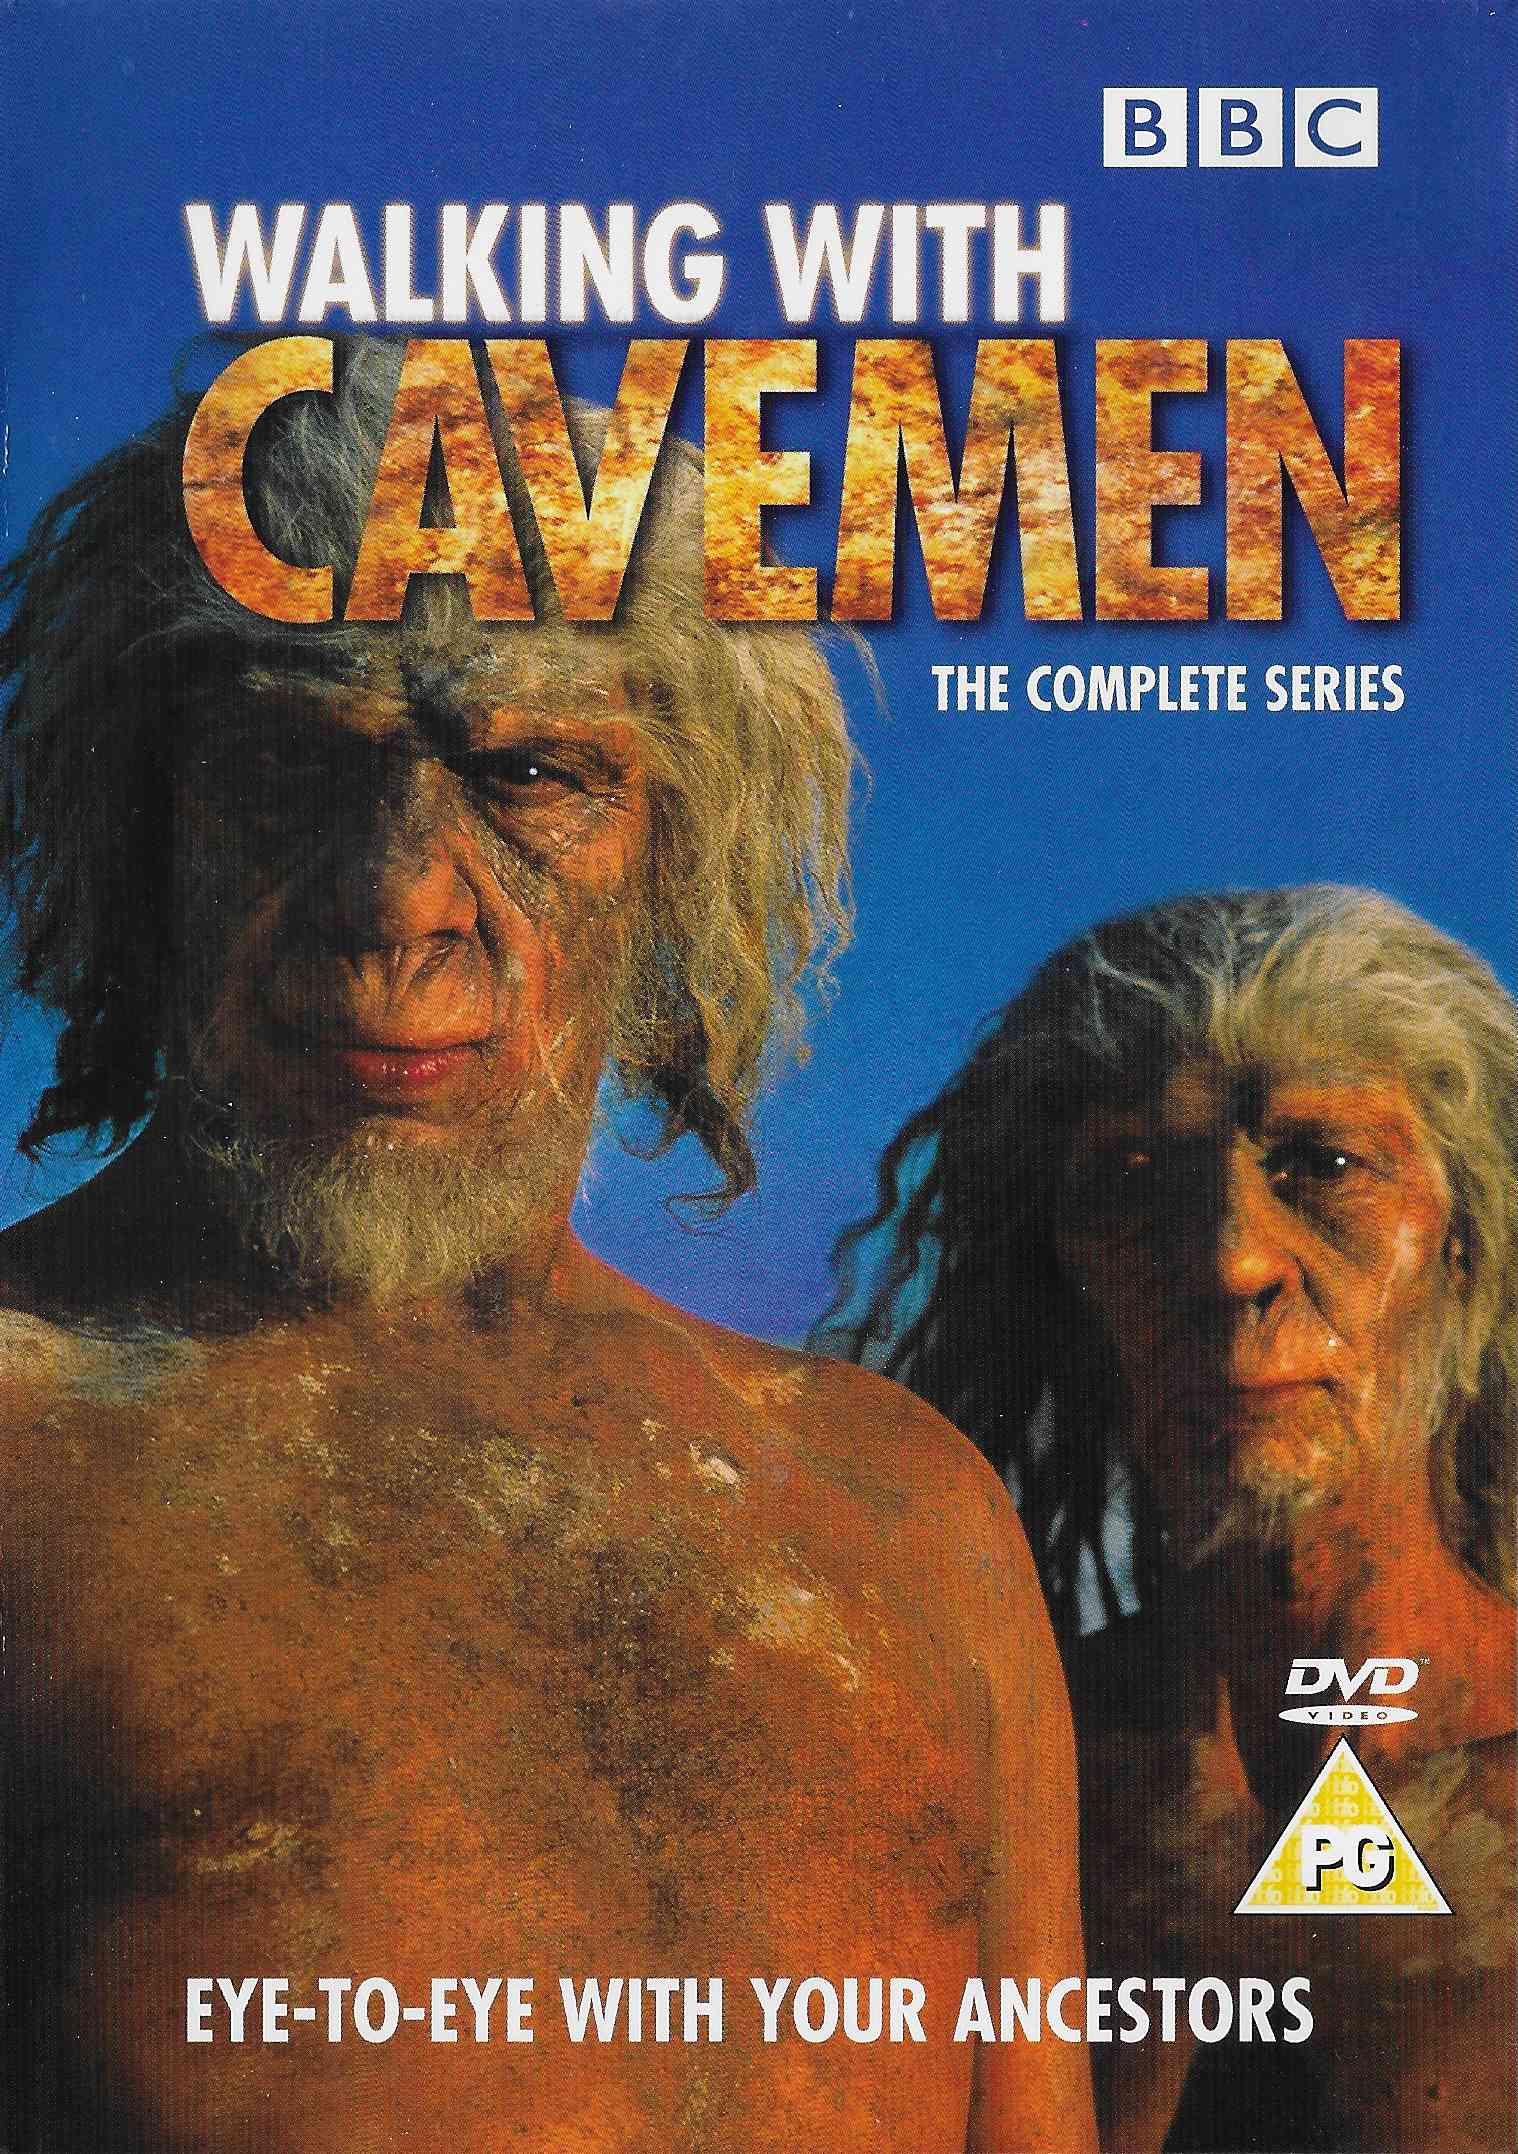 Picture of BBCDVD 1236 Walking with cavemen by artist Unknown from the BBC dvds - Records and Tapes library